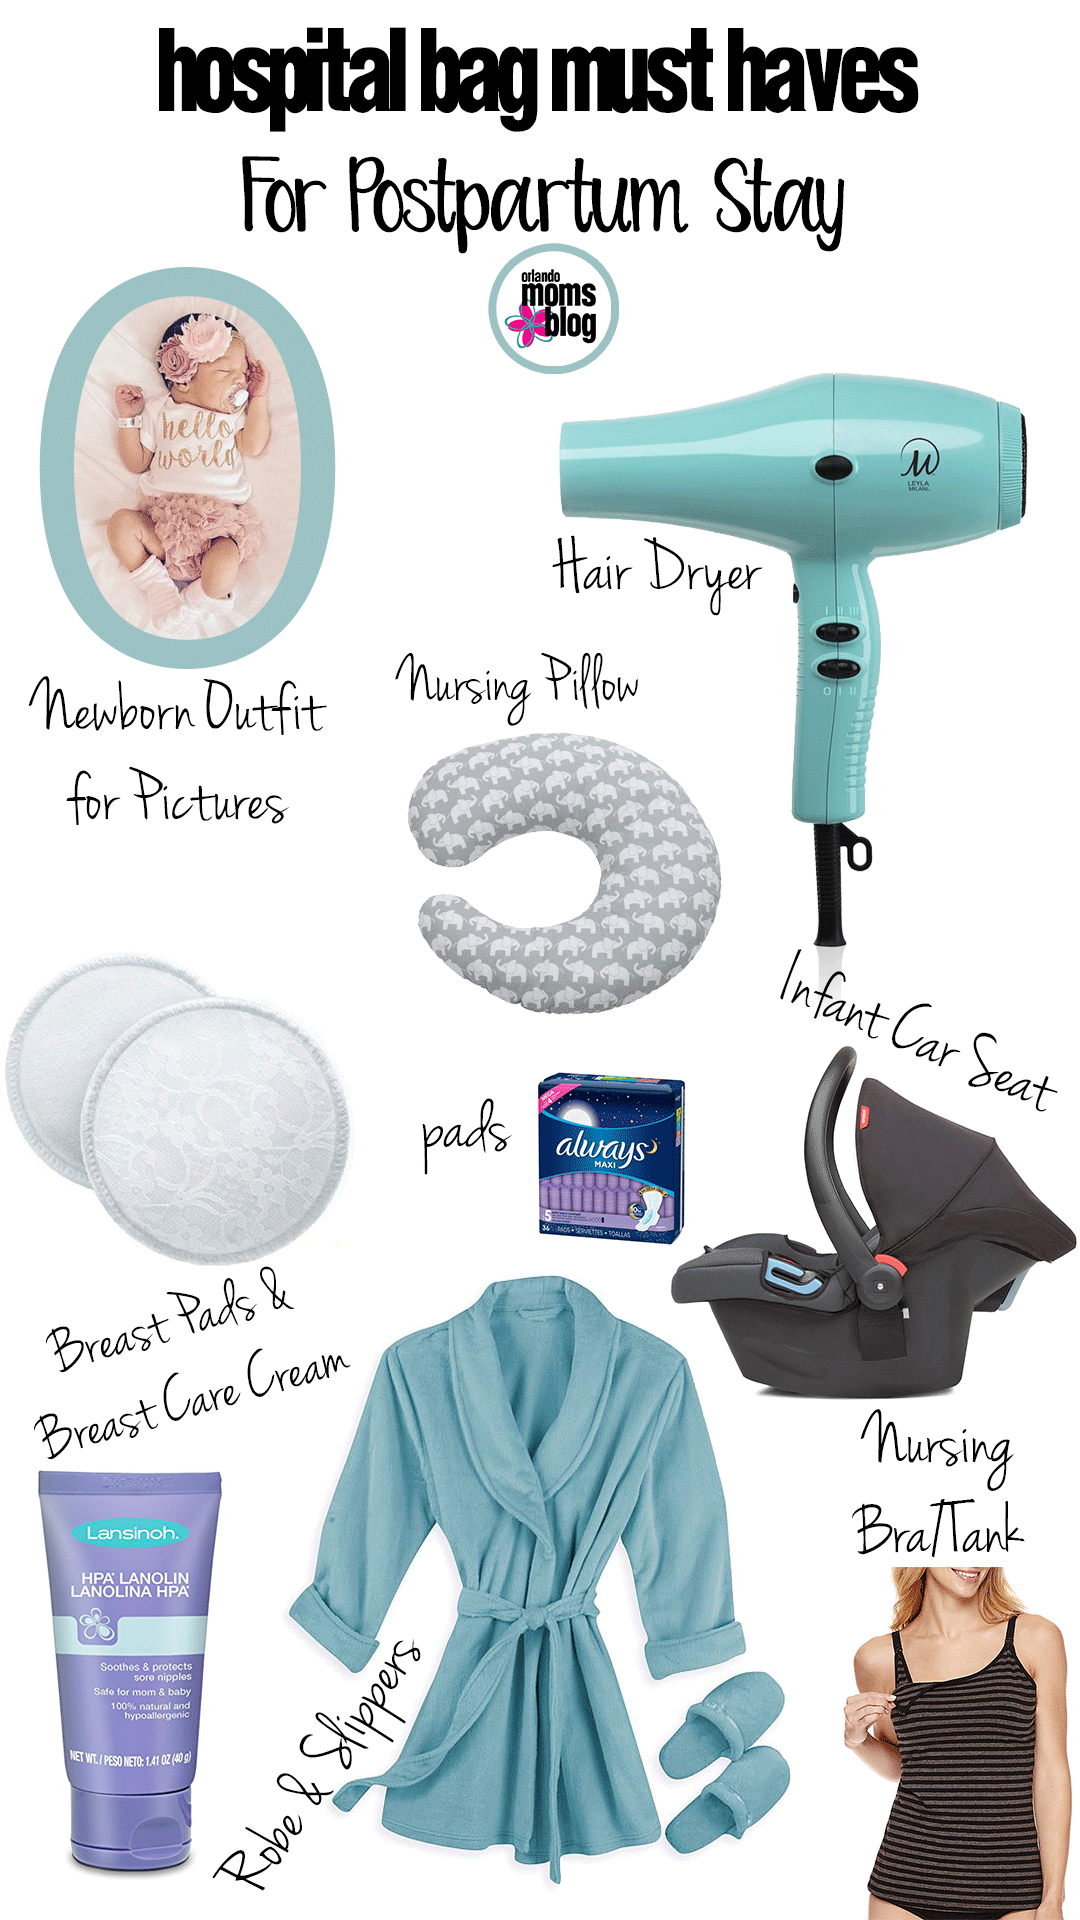 https://orlando.momcollective.com/wp-content/uploads/2018/10/Hospital-Bag-Must-Haves-2.png